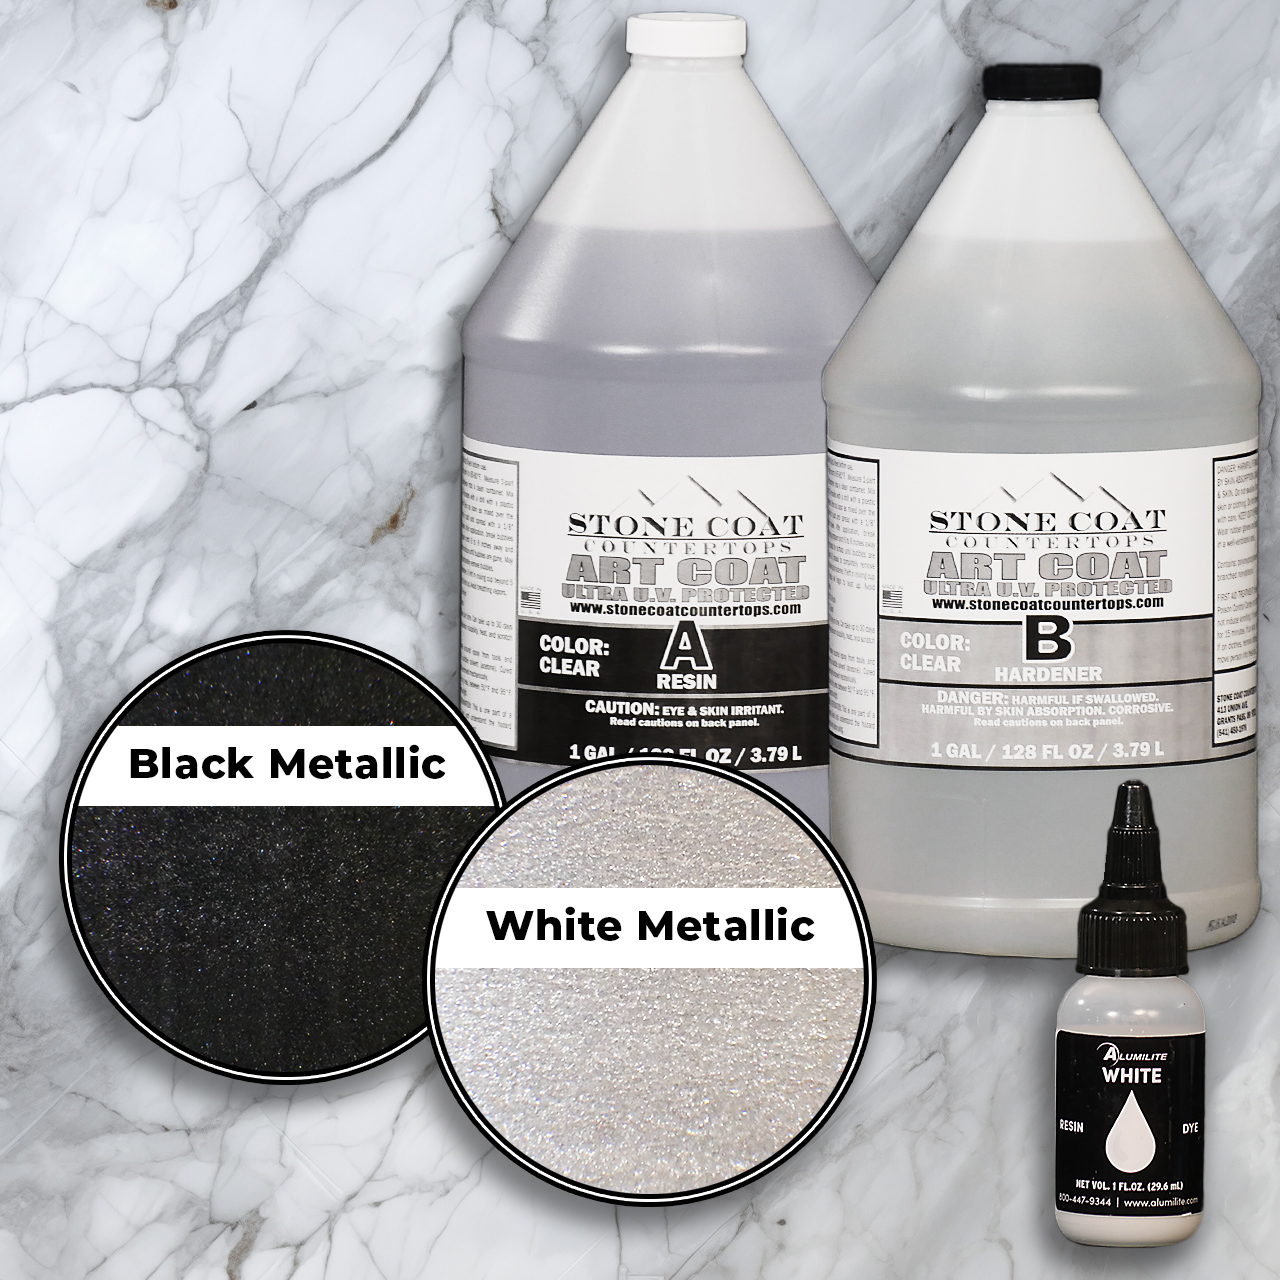 Purchase the Carrara marble epoxy kit online at Stone Coat Countertops. Our  Carrara marble epoxy countertop kit is affordable, easy to use, heat  resistant, and impact resistant. Shop for the Carrara marble